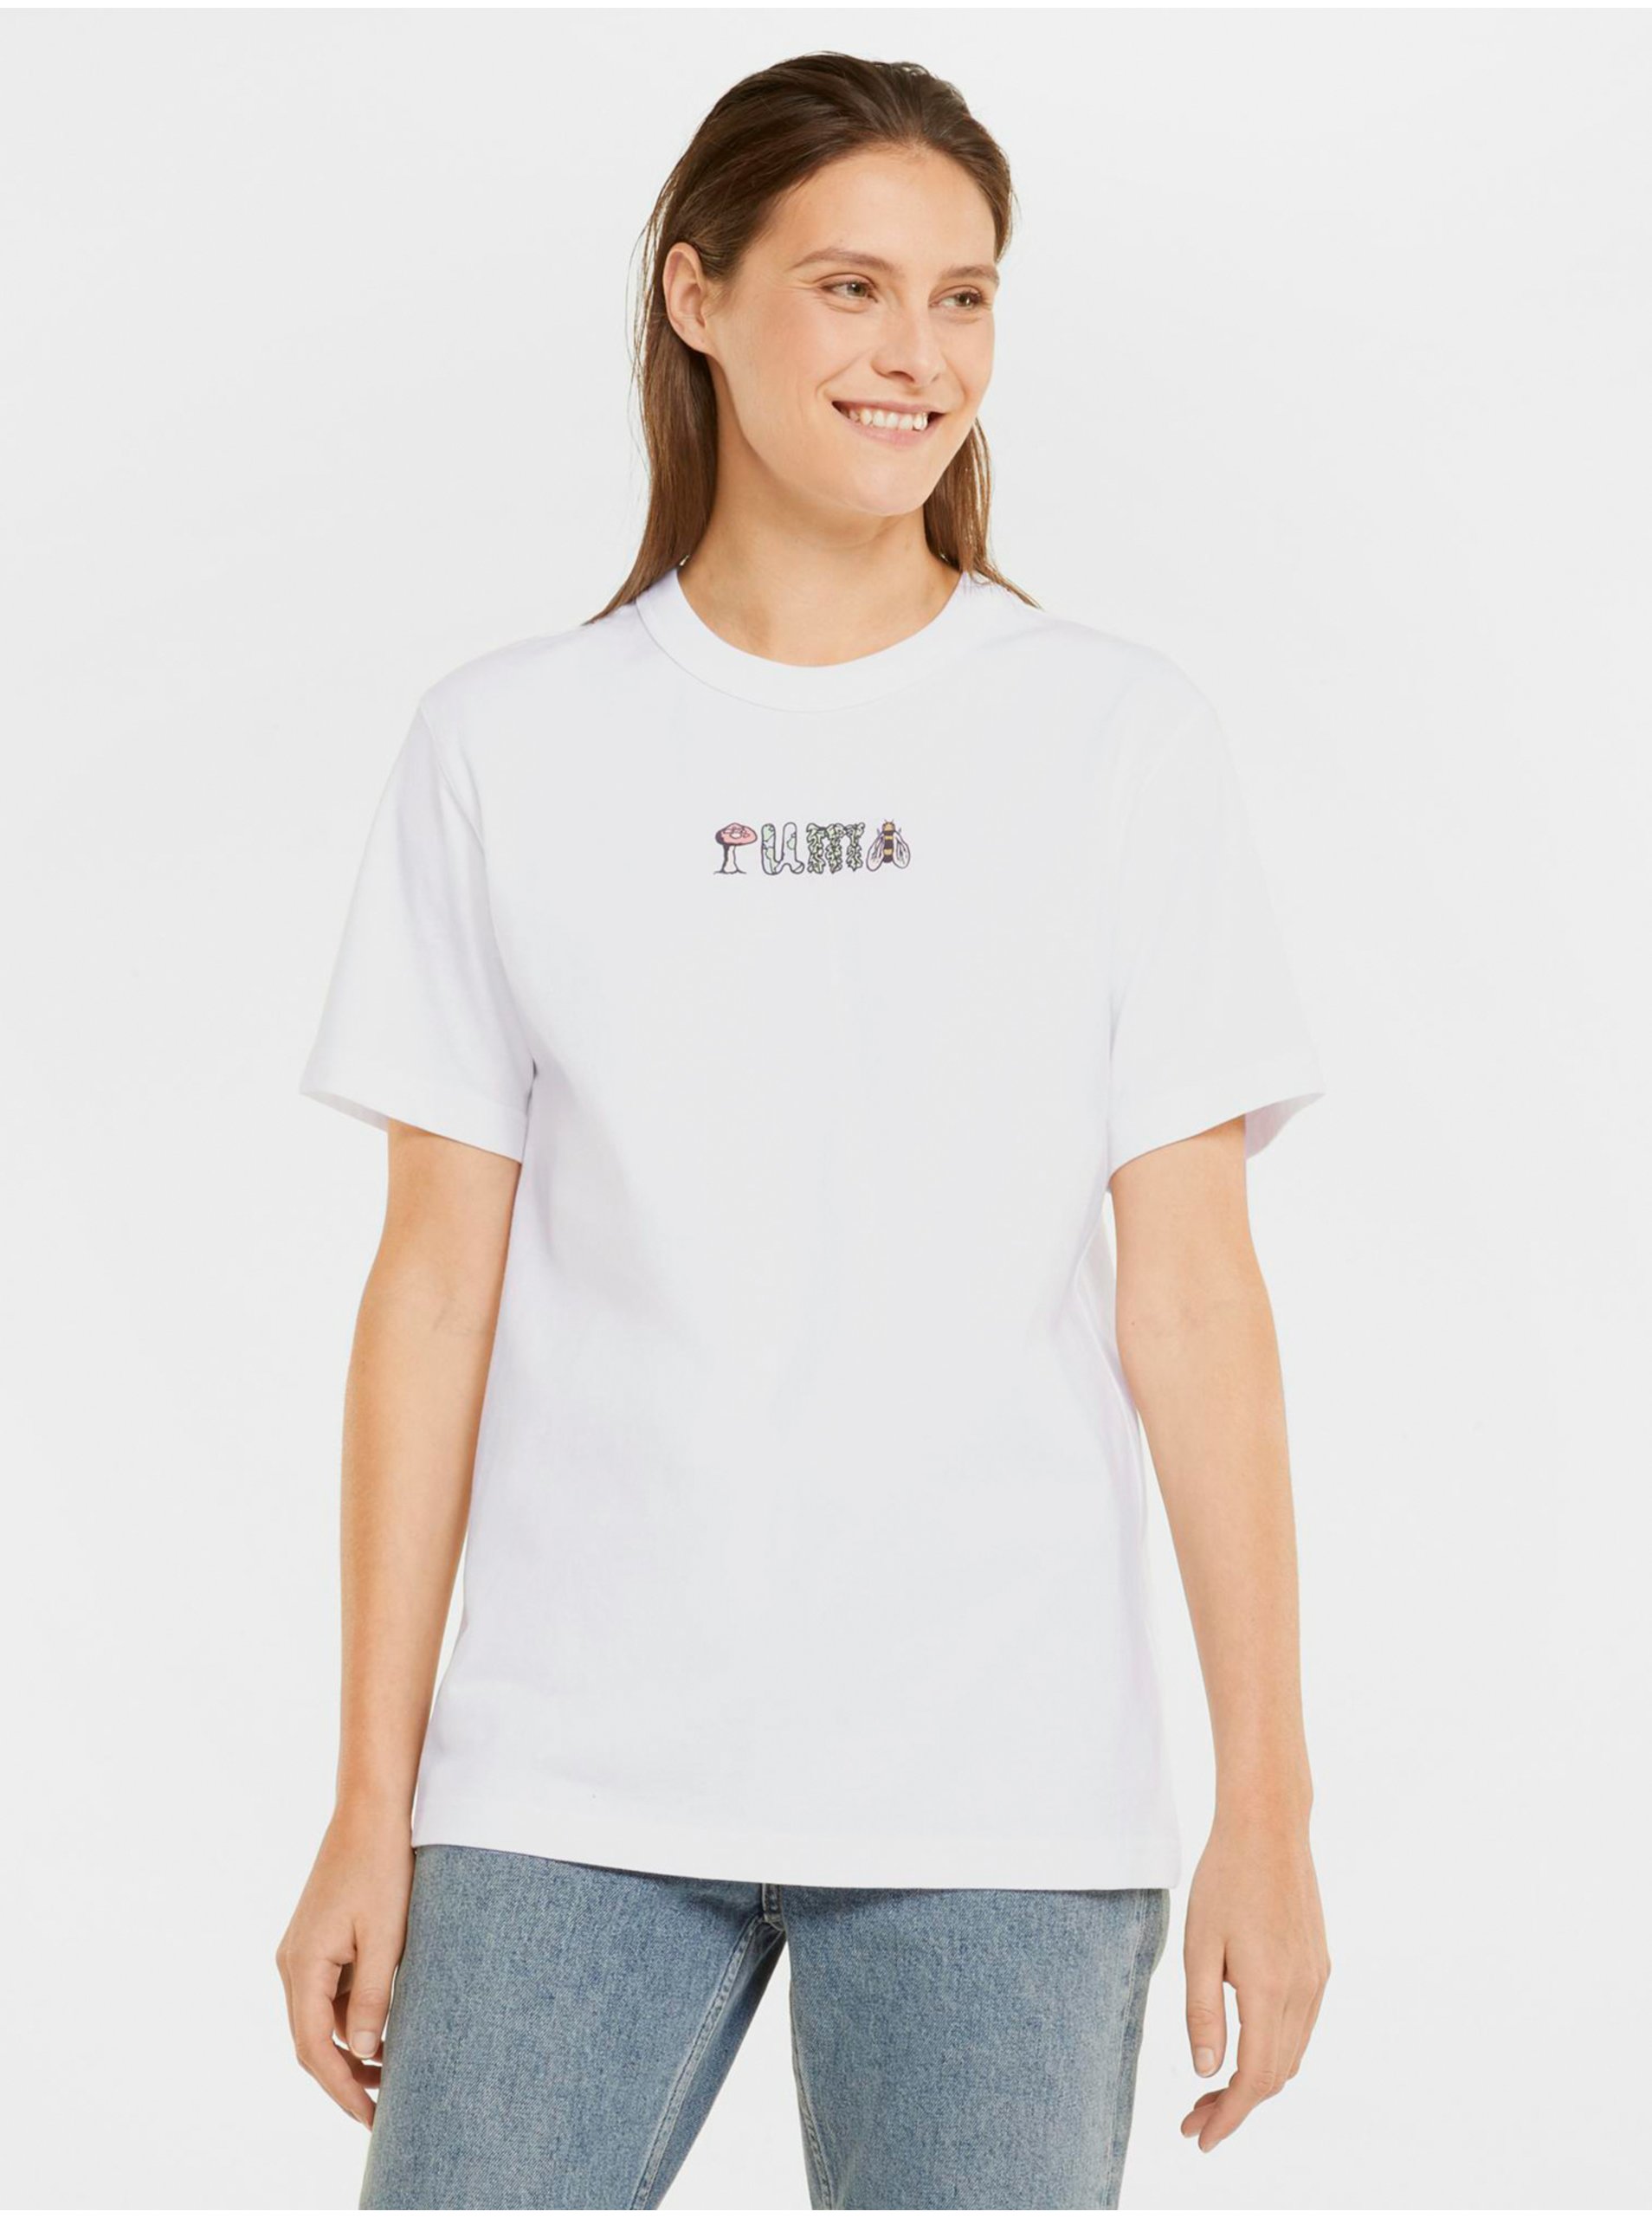 White Women's T-Shirt with Print on the Back Puma Downtown - Women